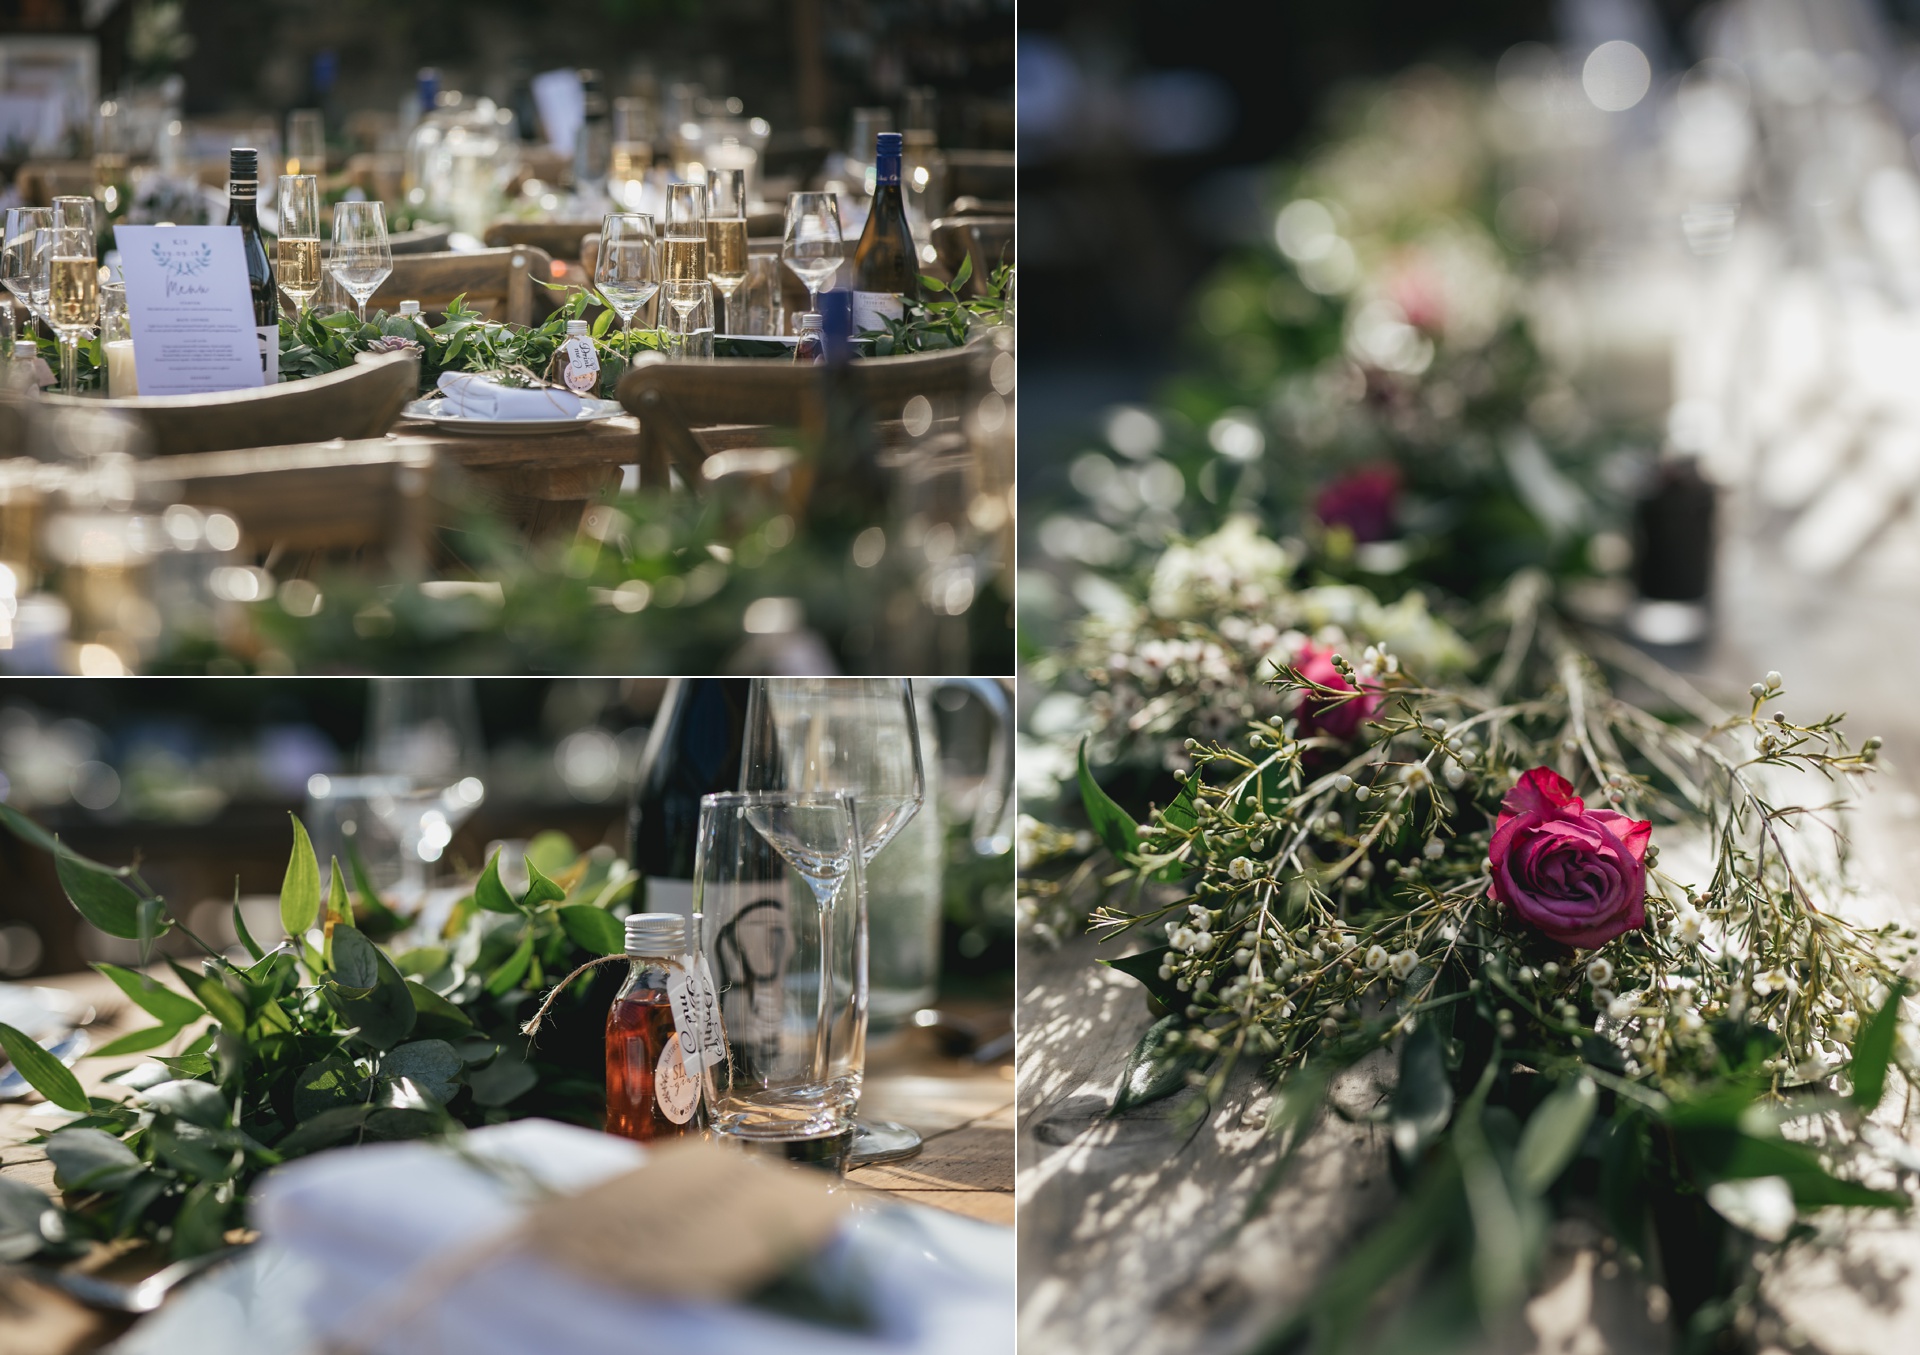 Details of greenery and flowers on wedding tables at Anran